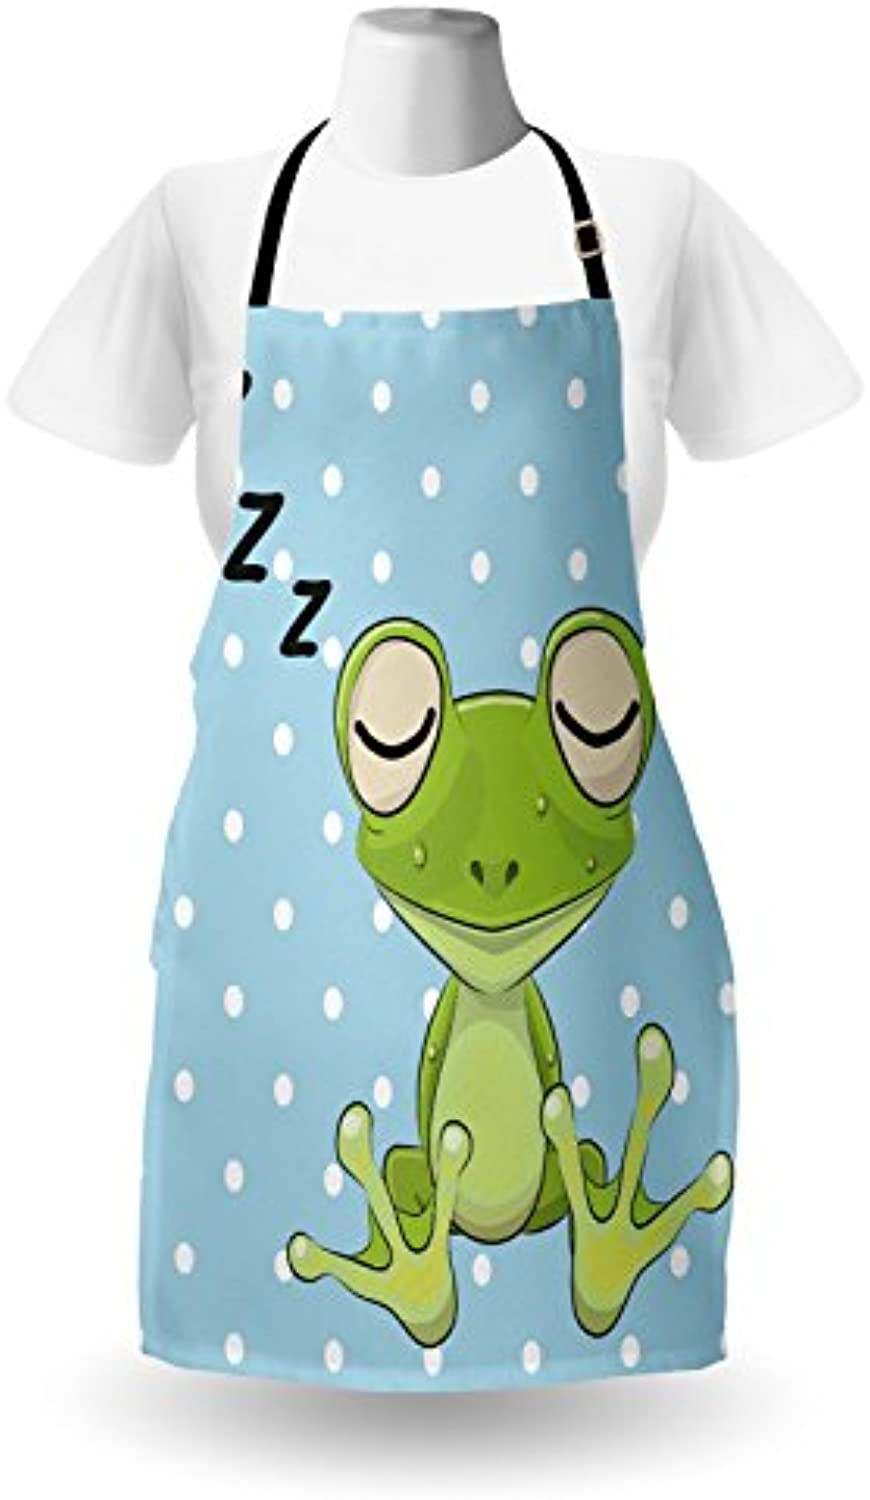 Granbey Cartoon Apron  Sleeping Prince Frog in a Cap Polka Dots Background Animal World Design  Unisex Kitchen Bib with Adjustable Neck for Cooking Gardening  Adult Size  Green Aqua